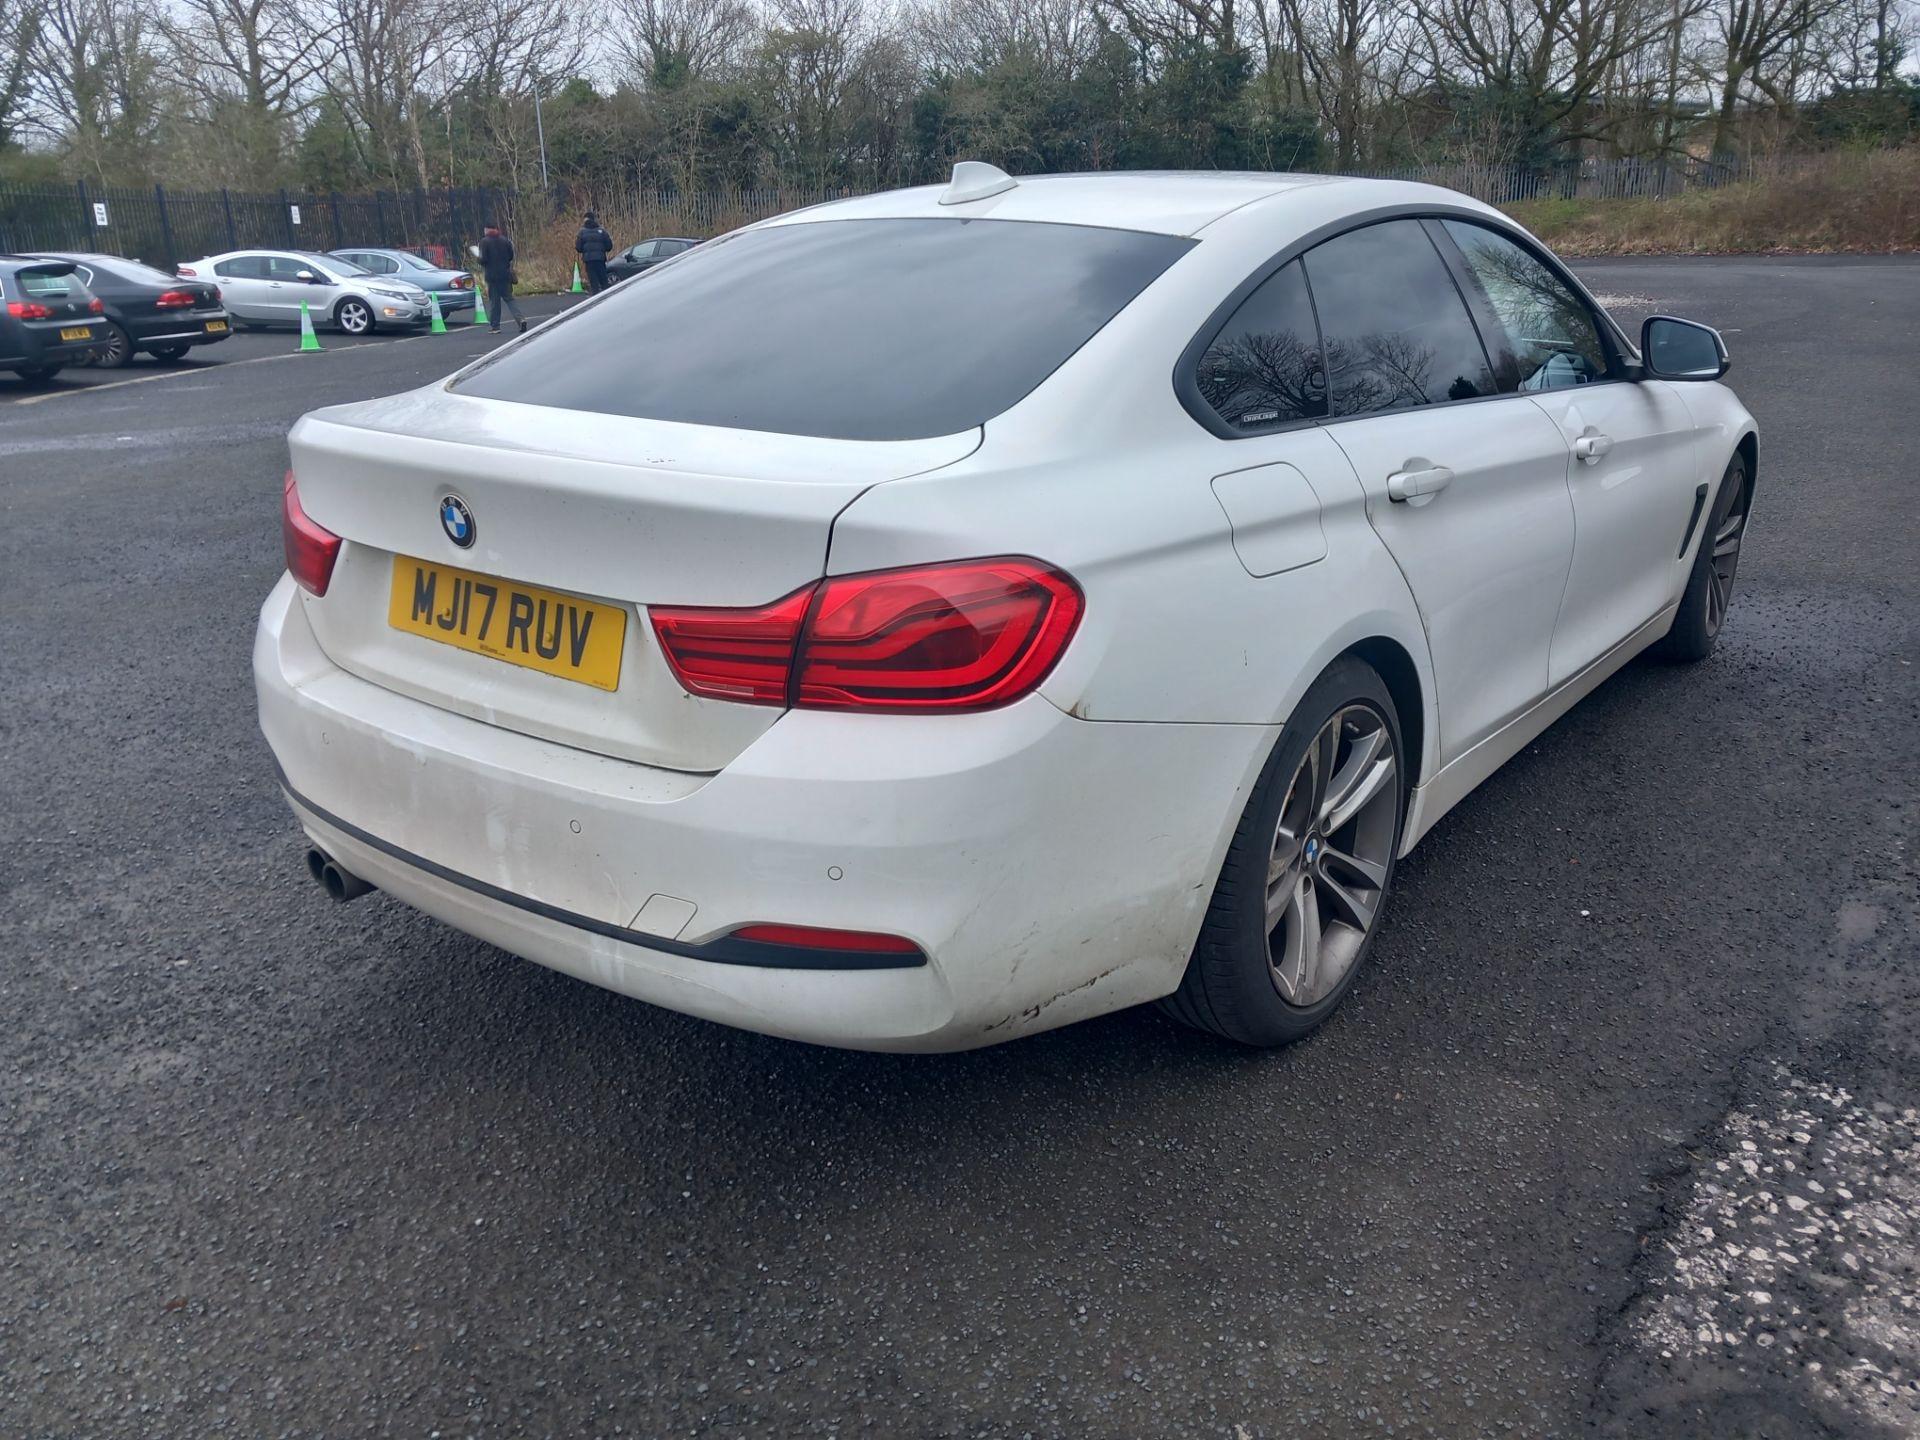 BMW 4 Series Gran Coupe 420i Sport 5 Door Auto, white, registration MJ17 RUV, first registered 16 - Image 6 of 11